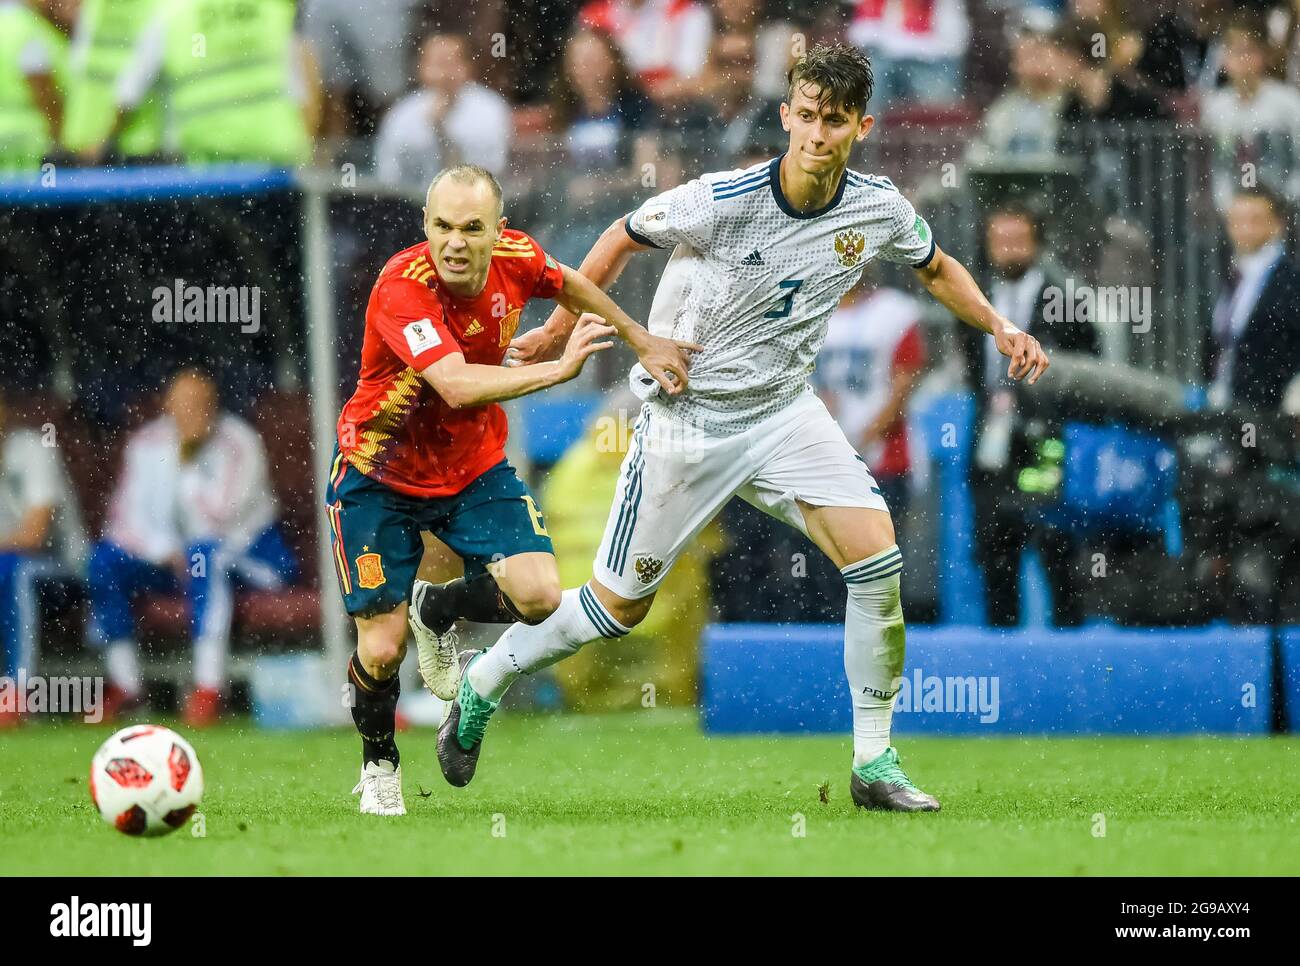 Moscow, Russia - July 1, 2018. Russia national football team defender Ilya Kutepov against Spain midfielder Andres Iniesta, in the pouring rain during Stock Photo